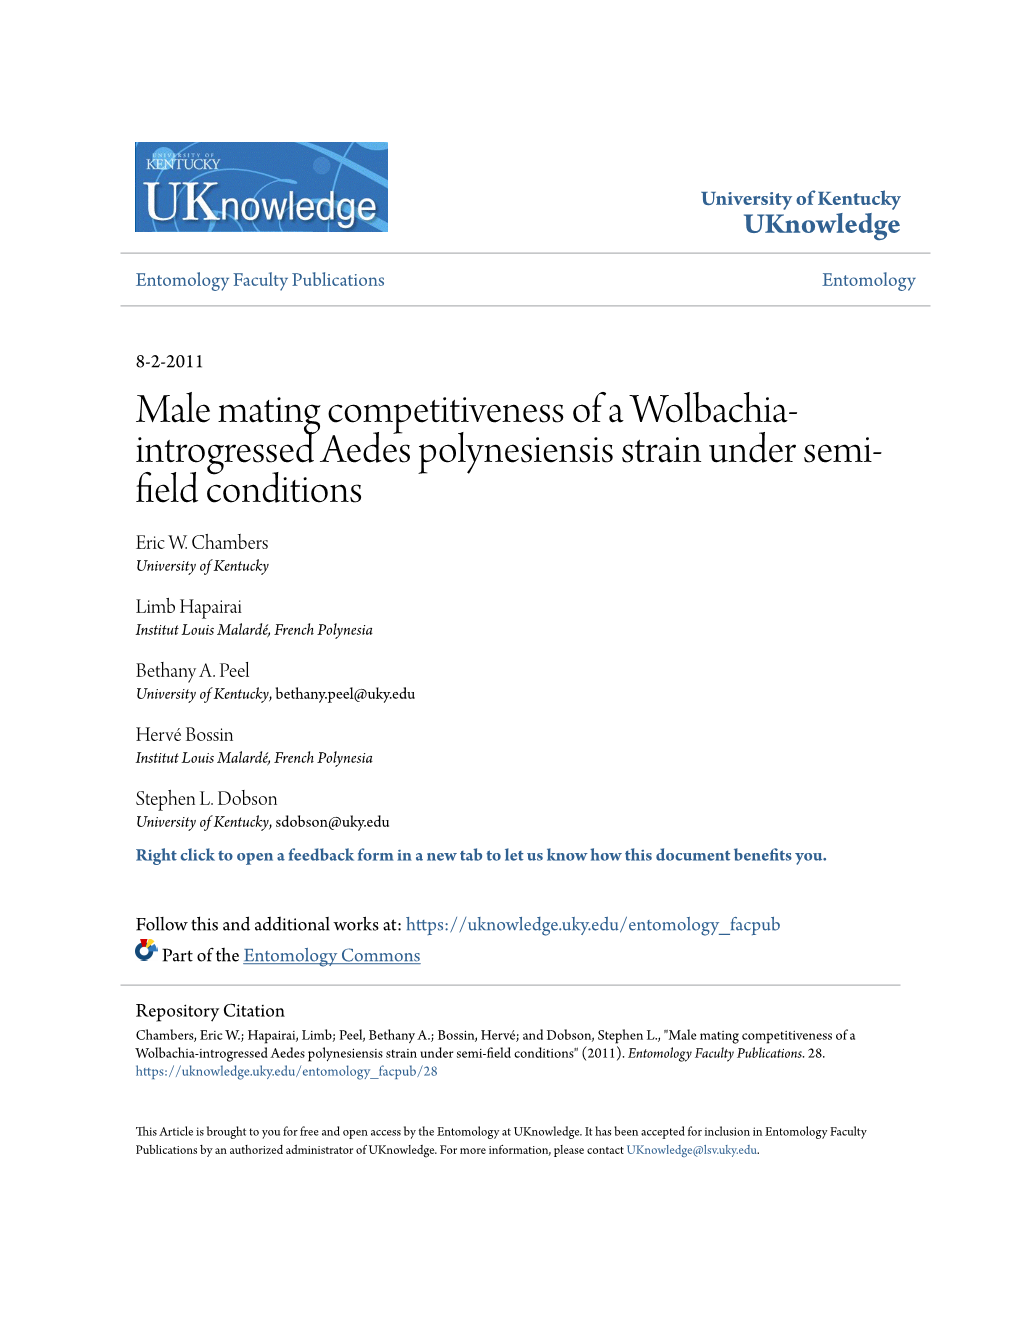 Male Mating Competitiveness of a Wolbachia-Introgressed Aedes Polynesiensis Strain Under Semi-Field Conditions" (2011)